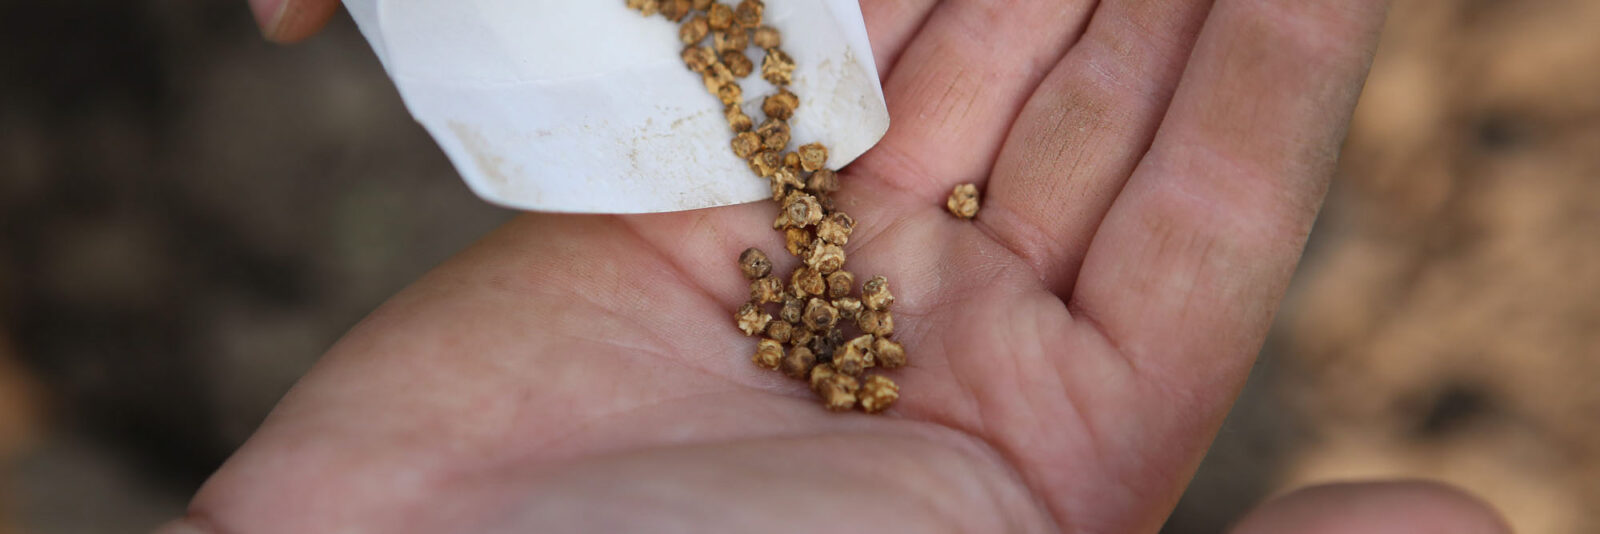 Seeds falling out of a small white envelope into the palm of a hand